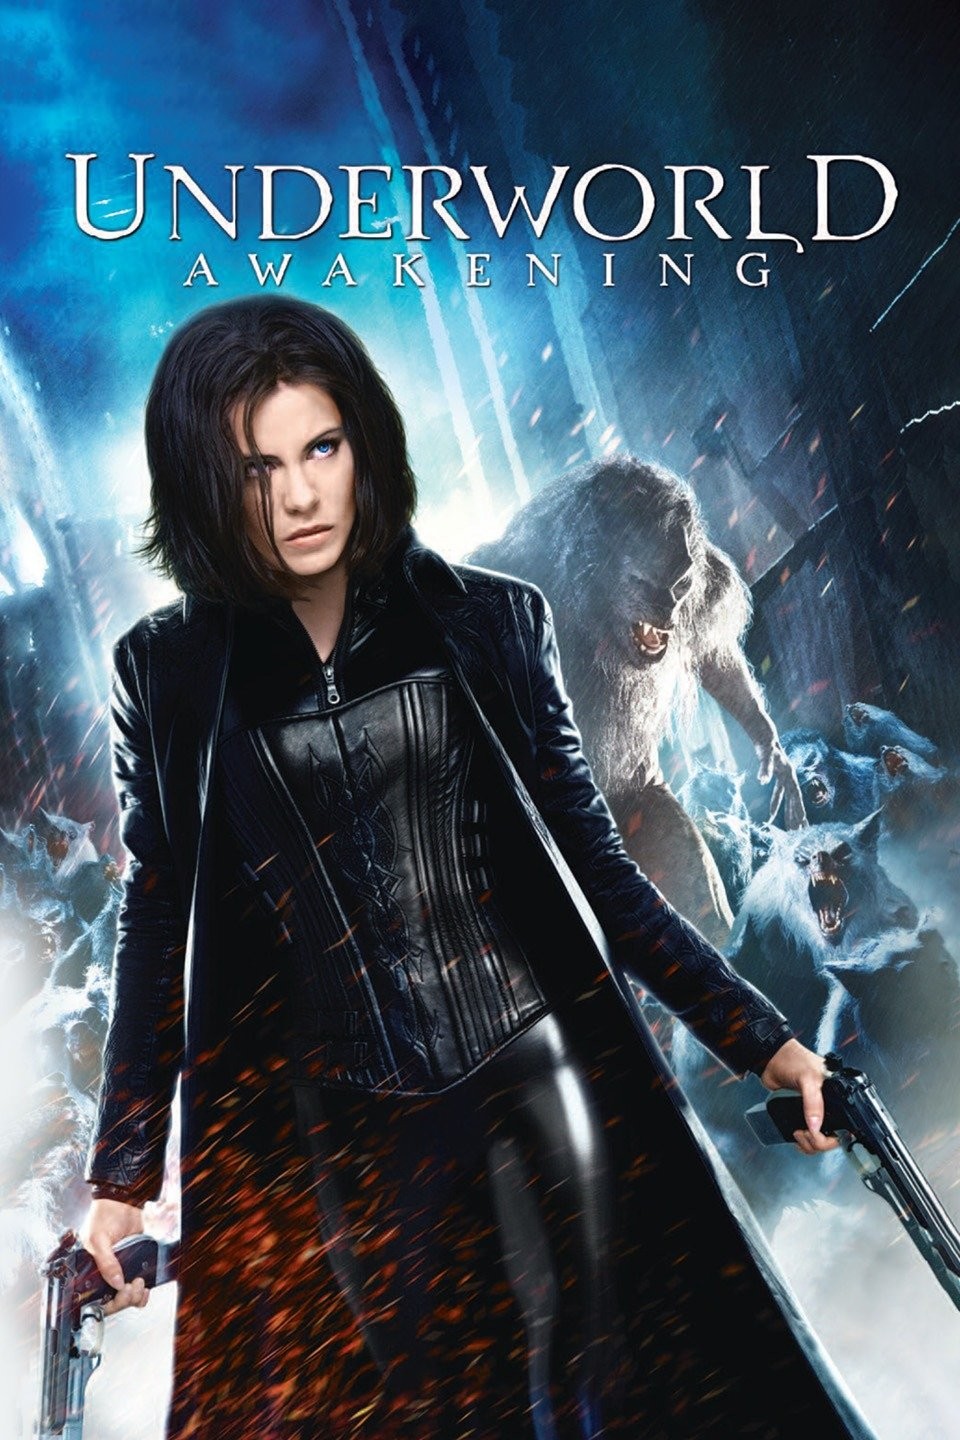 carolyn cleveland recommends Underworld Full Free Movie